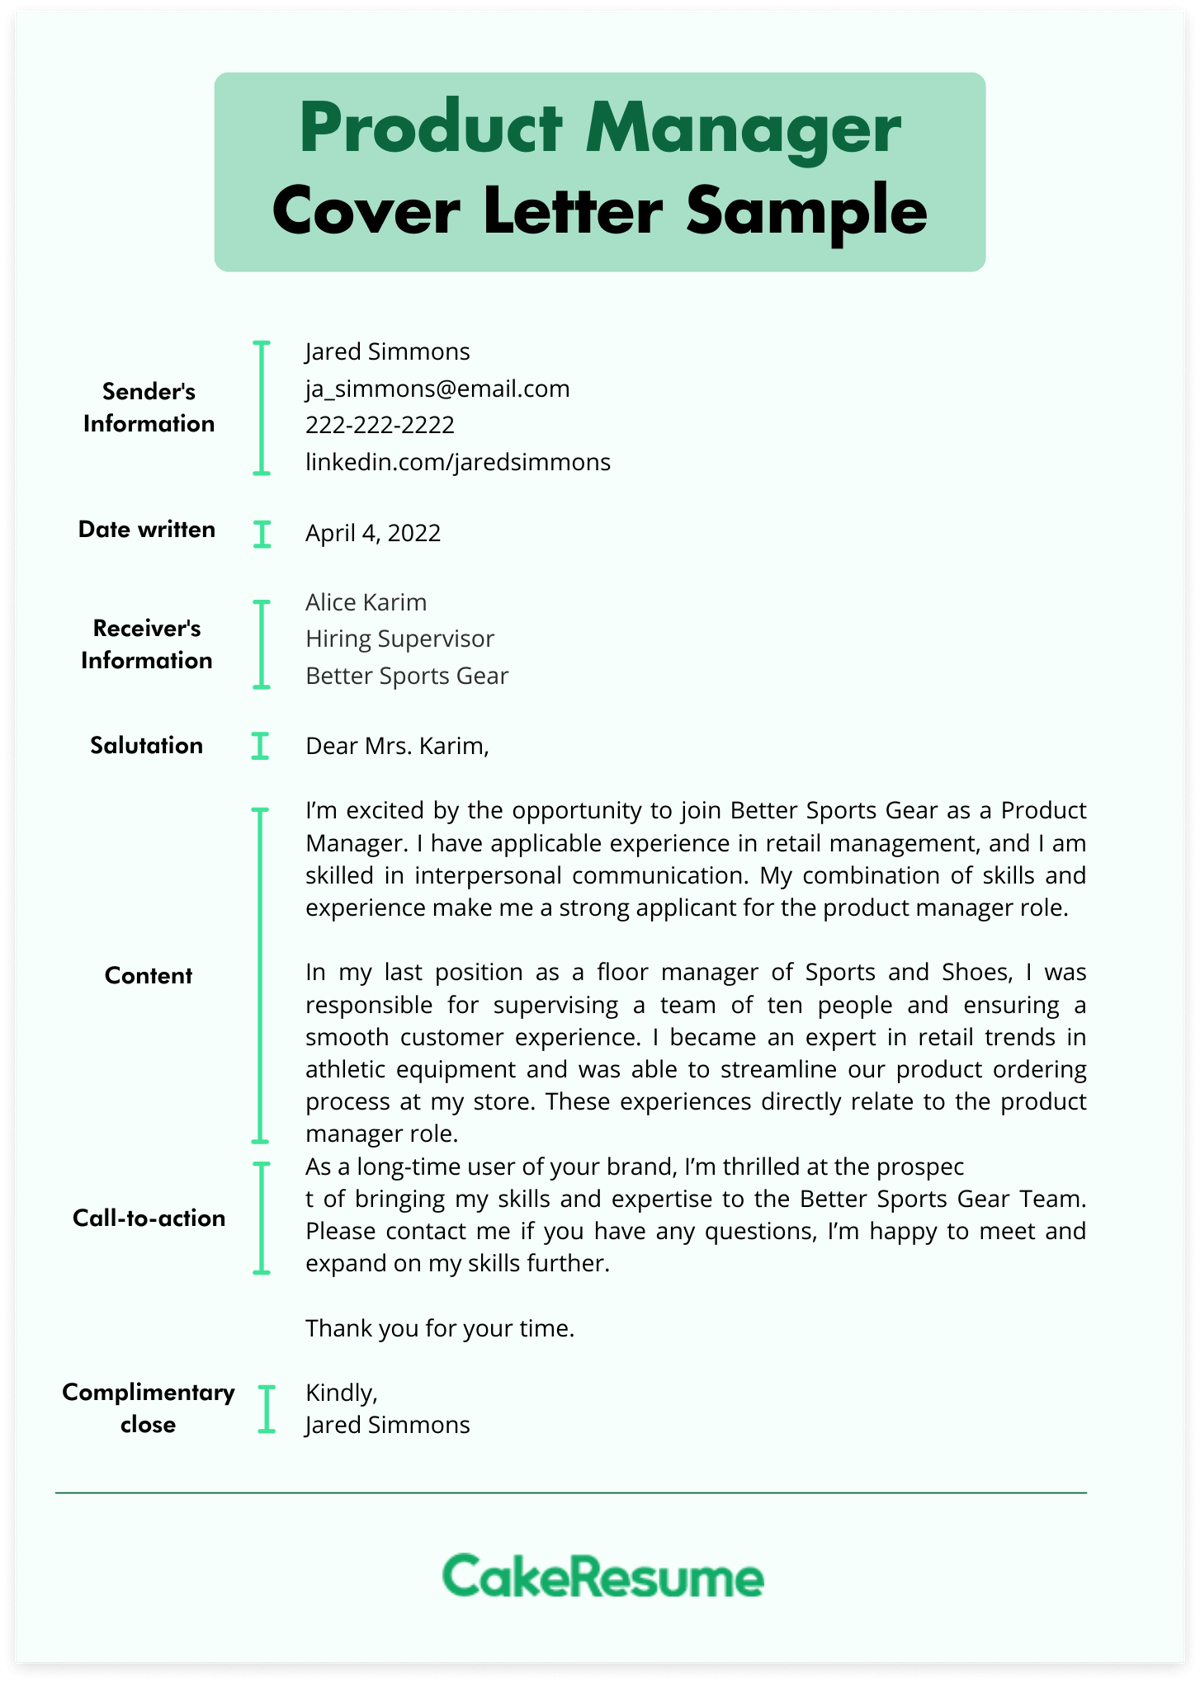 Product Manager Cover Letter Sample